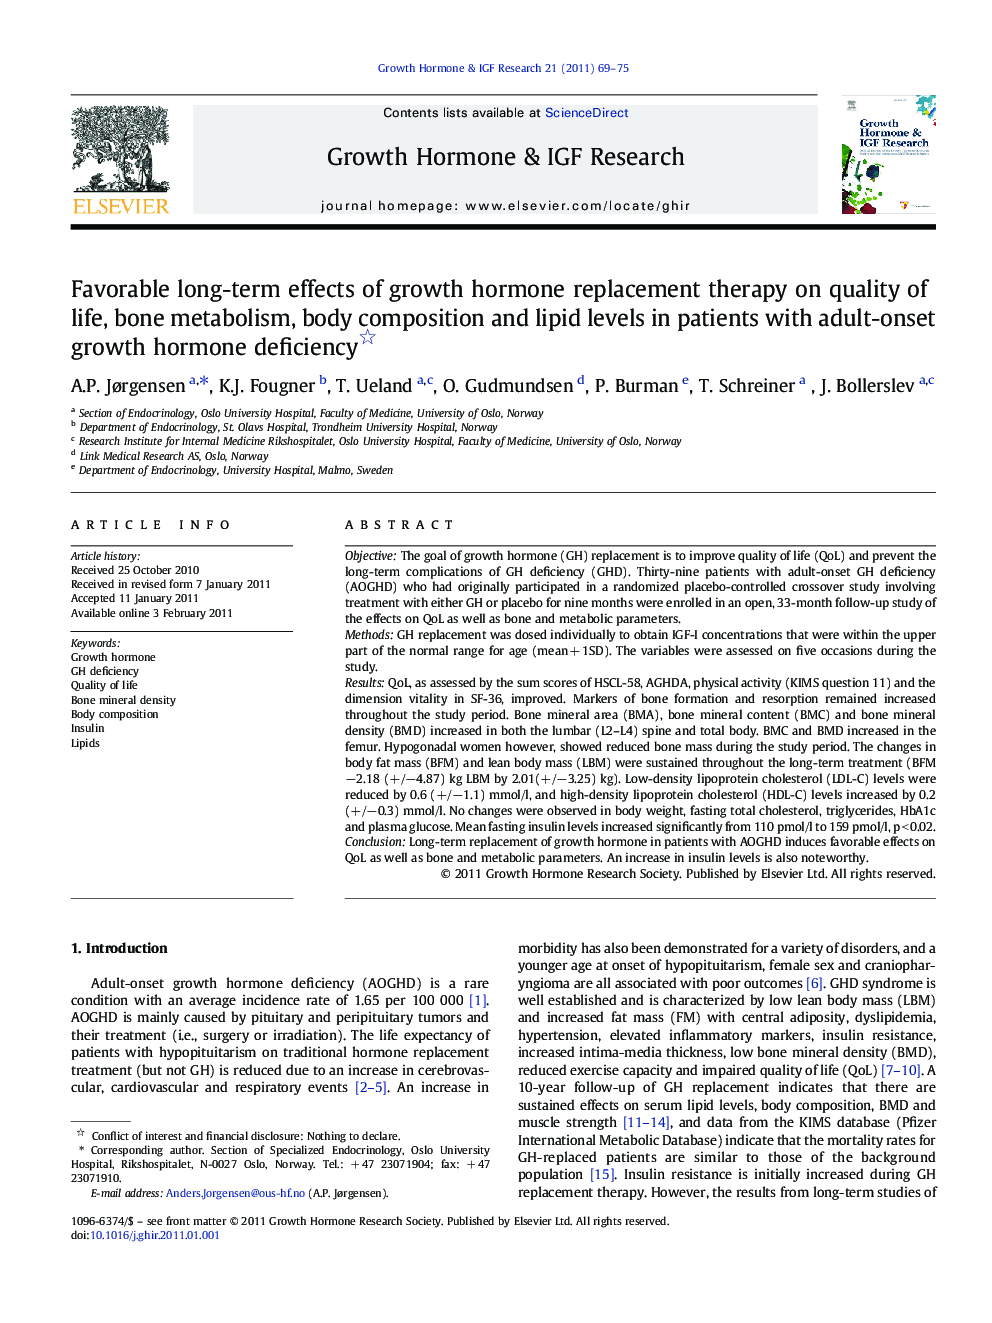 Favorable long-term effects of growth hormone replacement therapy on quality of life, bone metabolism, body composition and lipid levels in patients with adult-onset growth hormone deficiency 